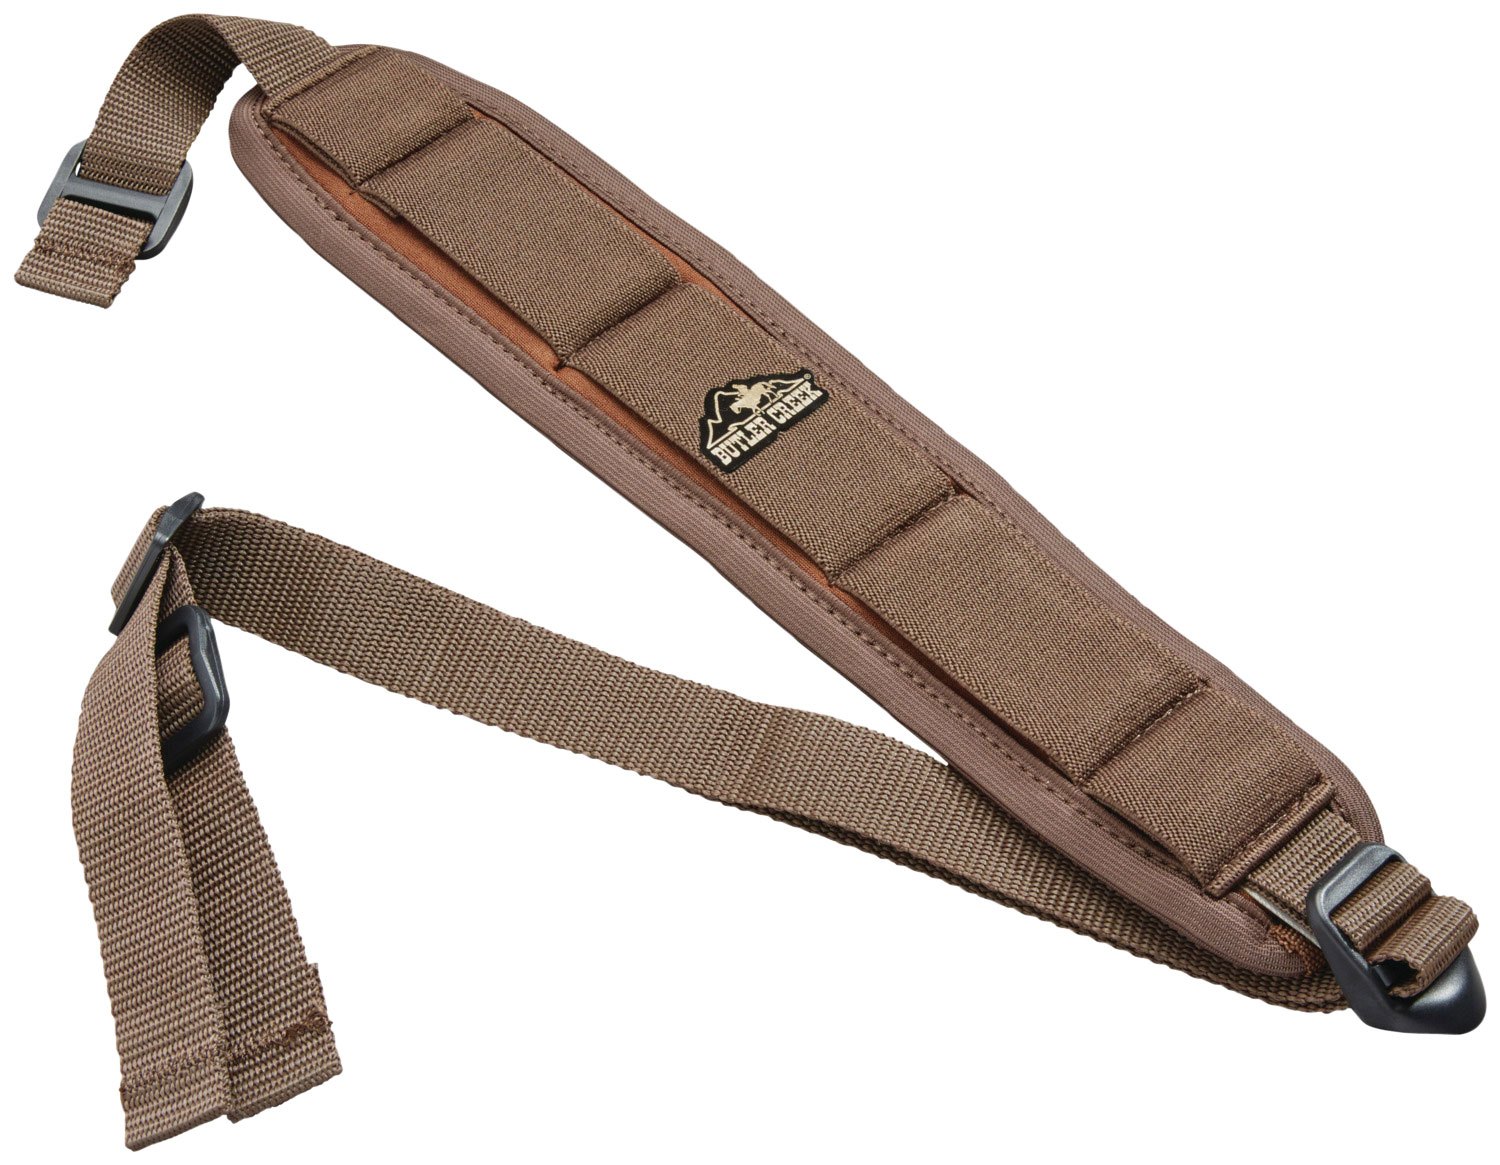 Butler Creek 180015 Comfort Stretch Sling made of Brown Neoprene with Non-Slip Grippers, 20